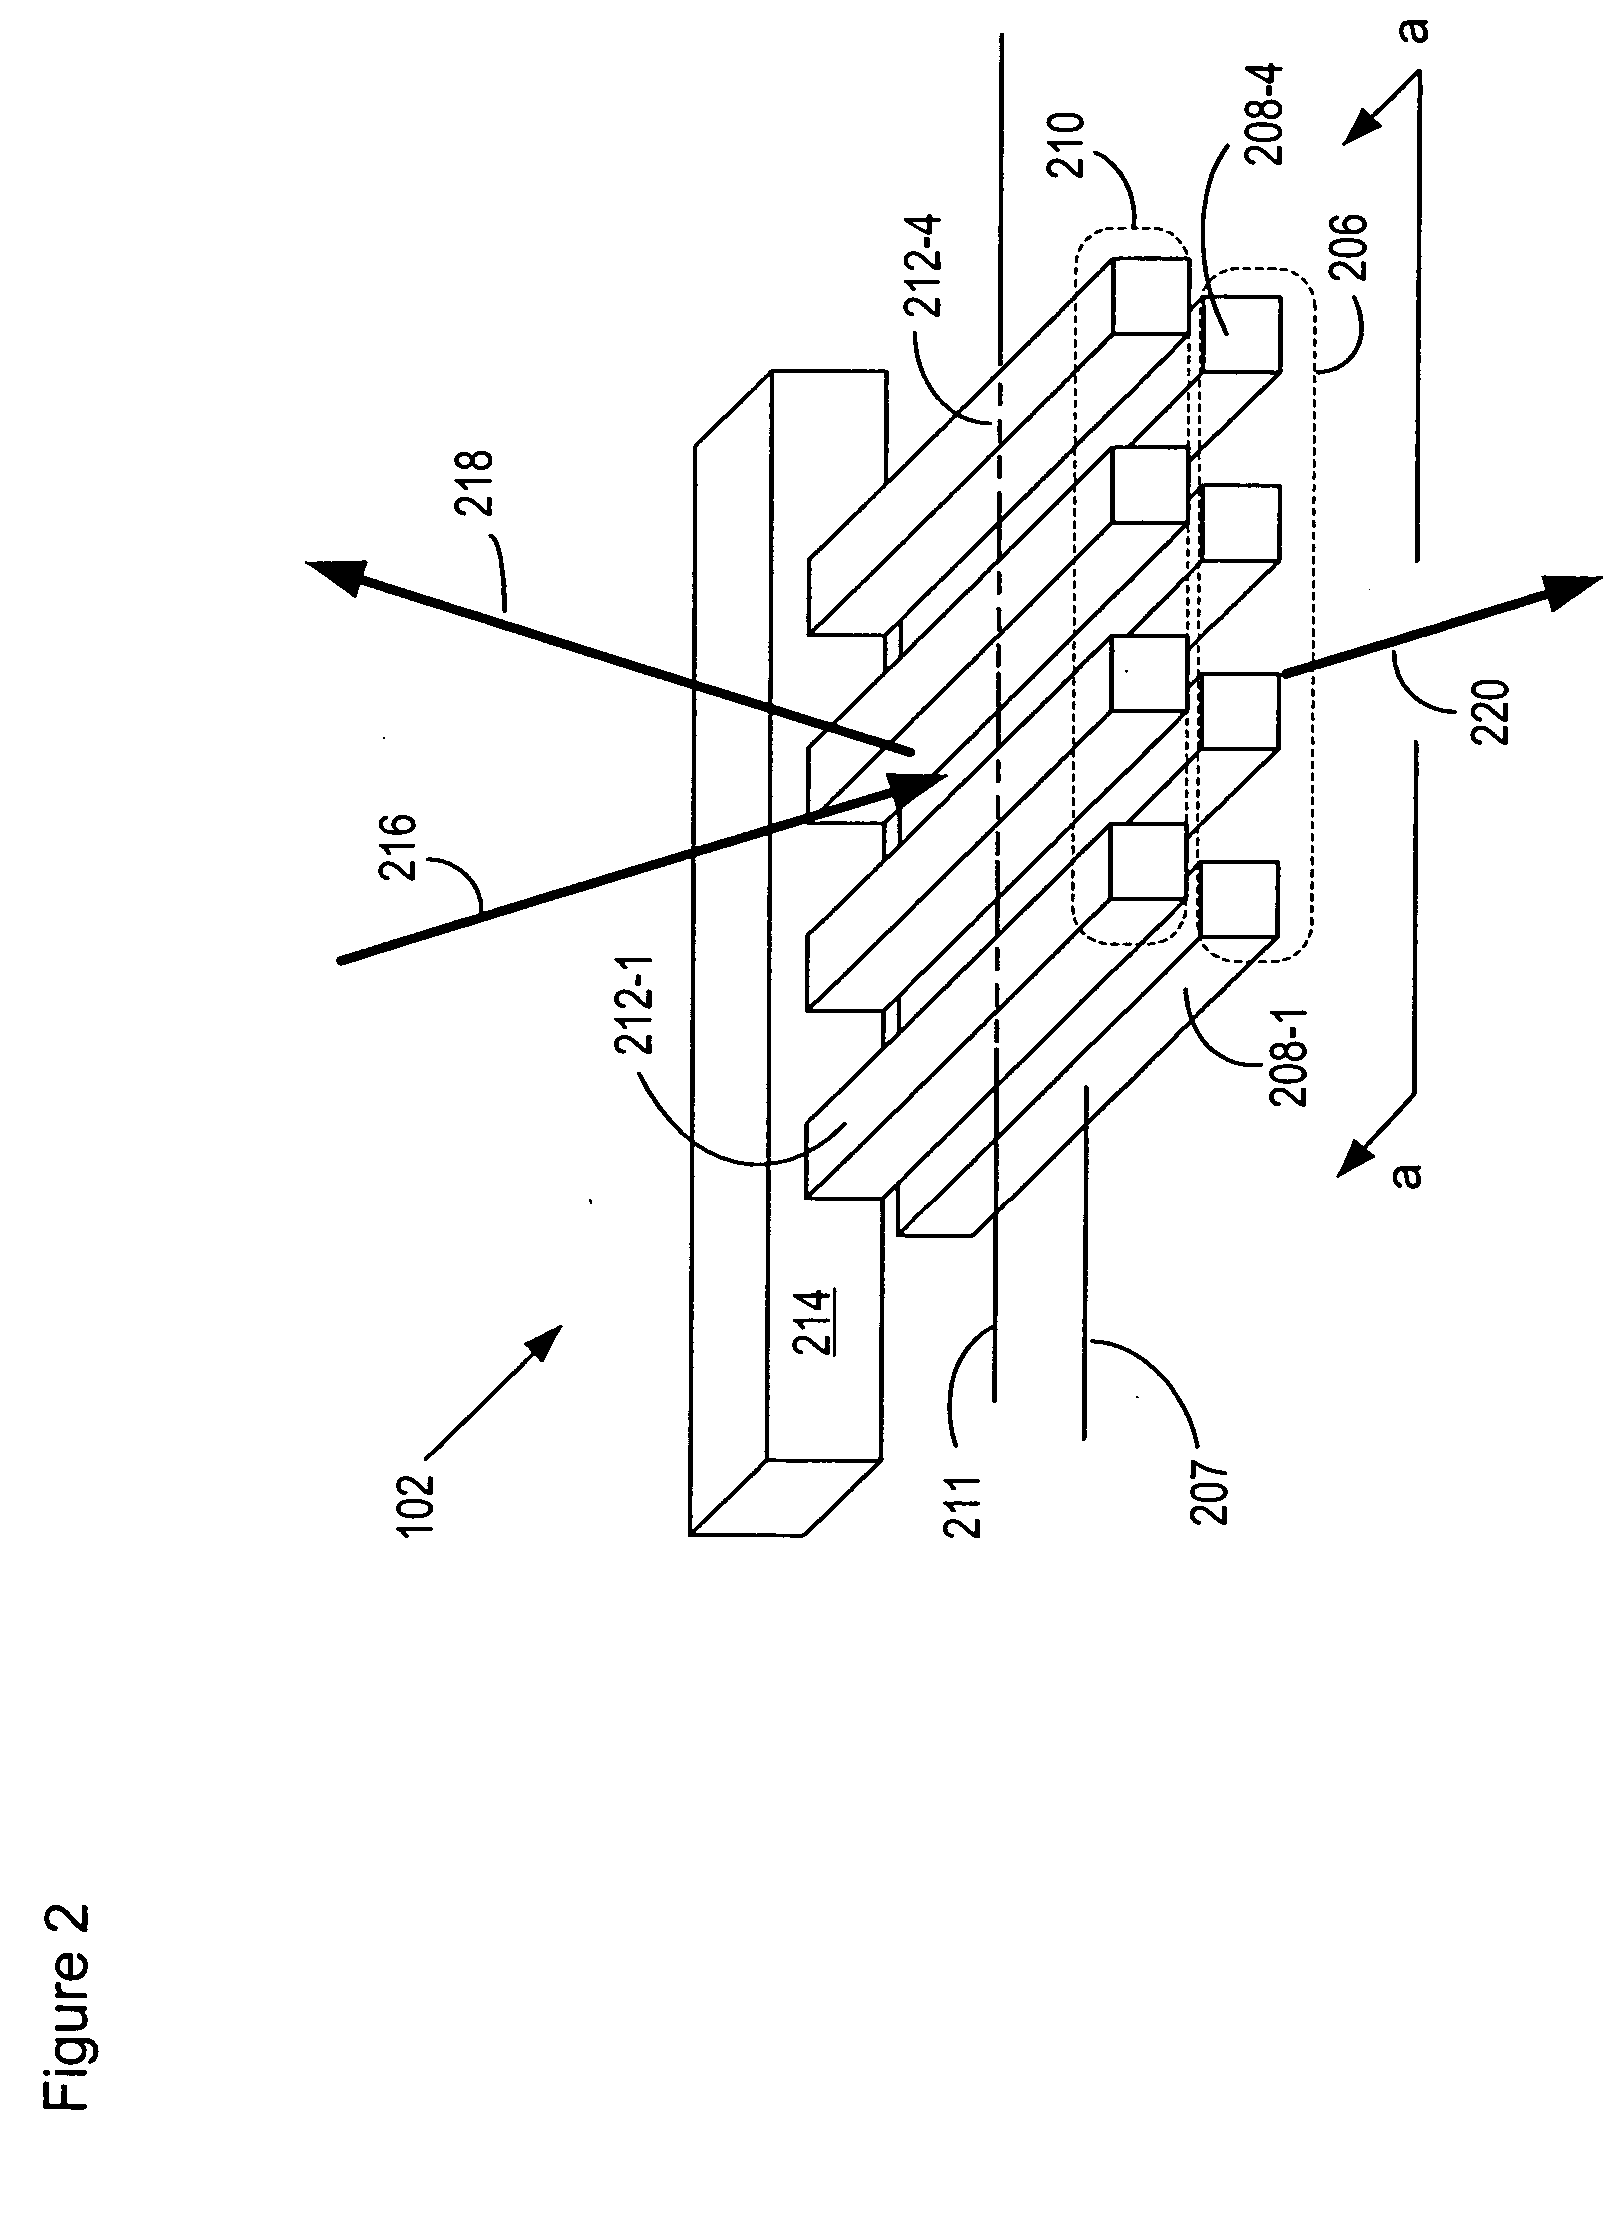 Apparatus comprising a tunable nanomechanical near-field grating and method for controlling far-field emission